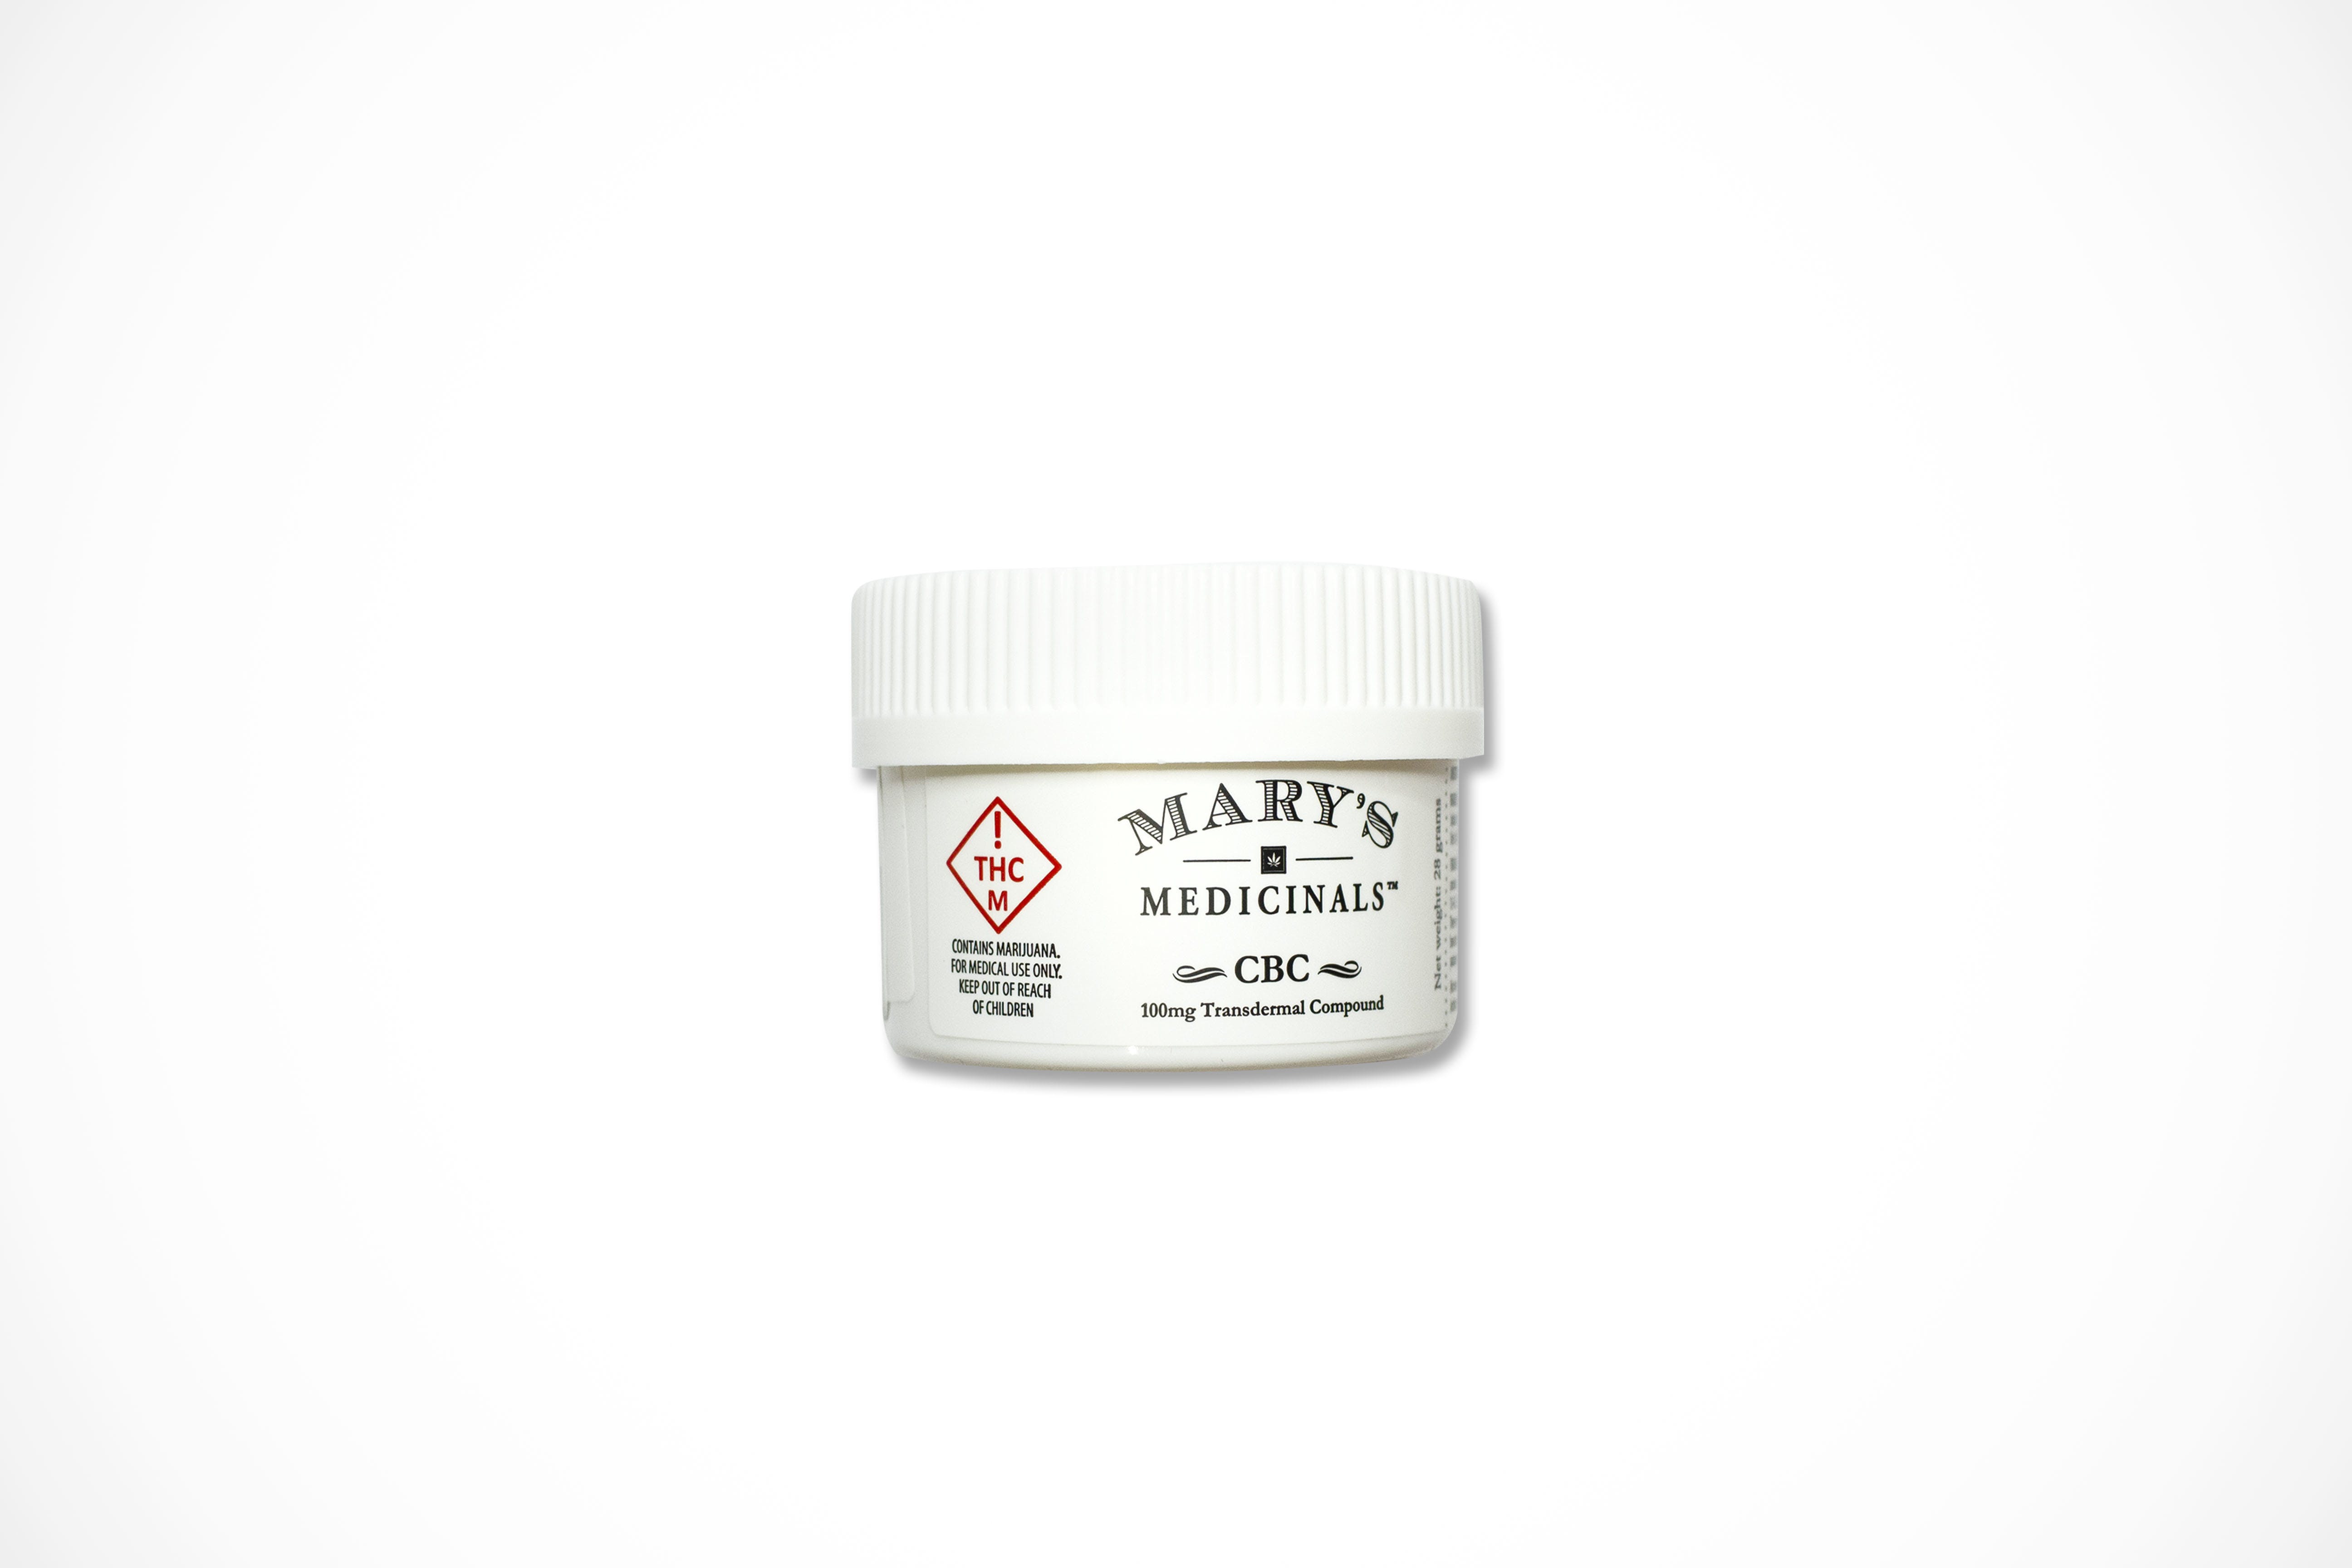 marijuana-dispensaries-kind-pain-management-medical-only-in-lakewood-marys-medicinals-1oz-cbc-compound